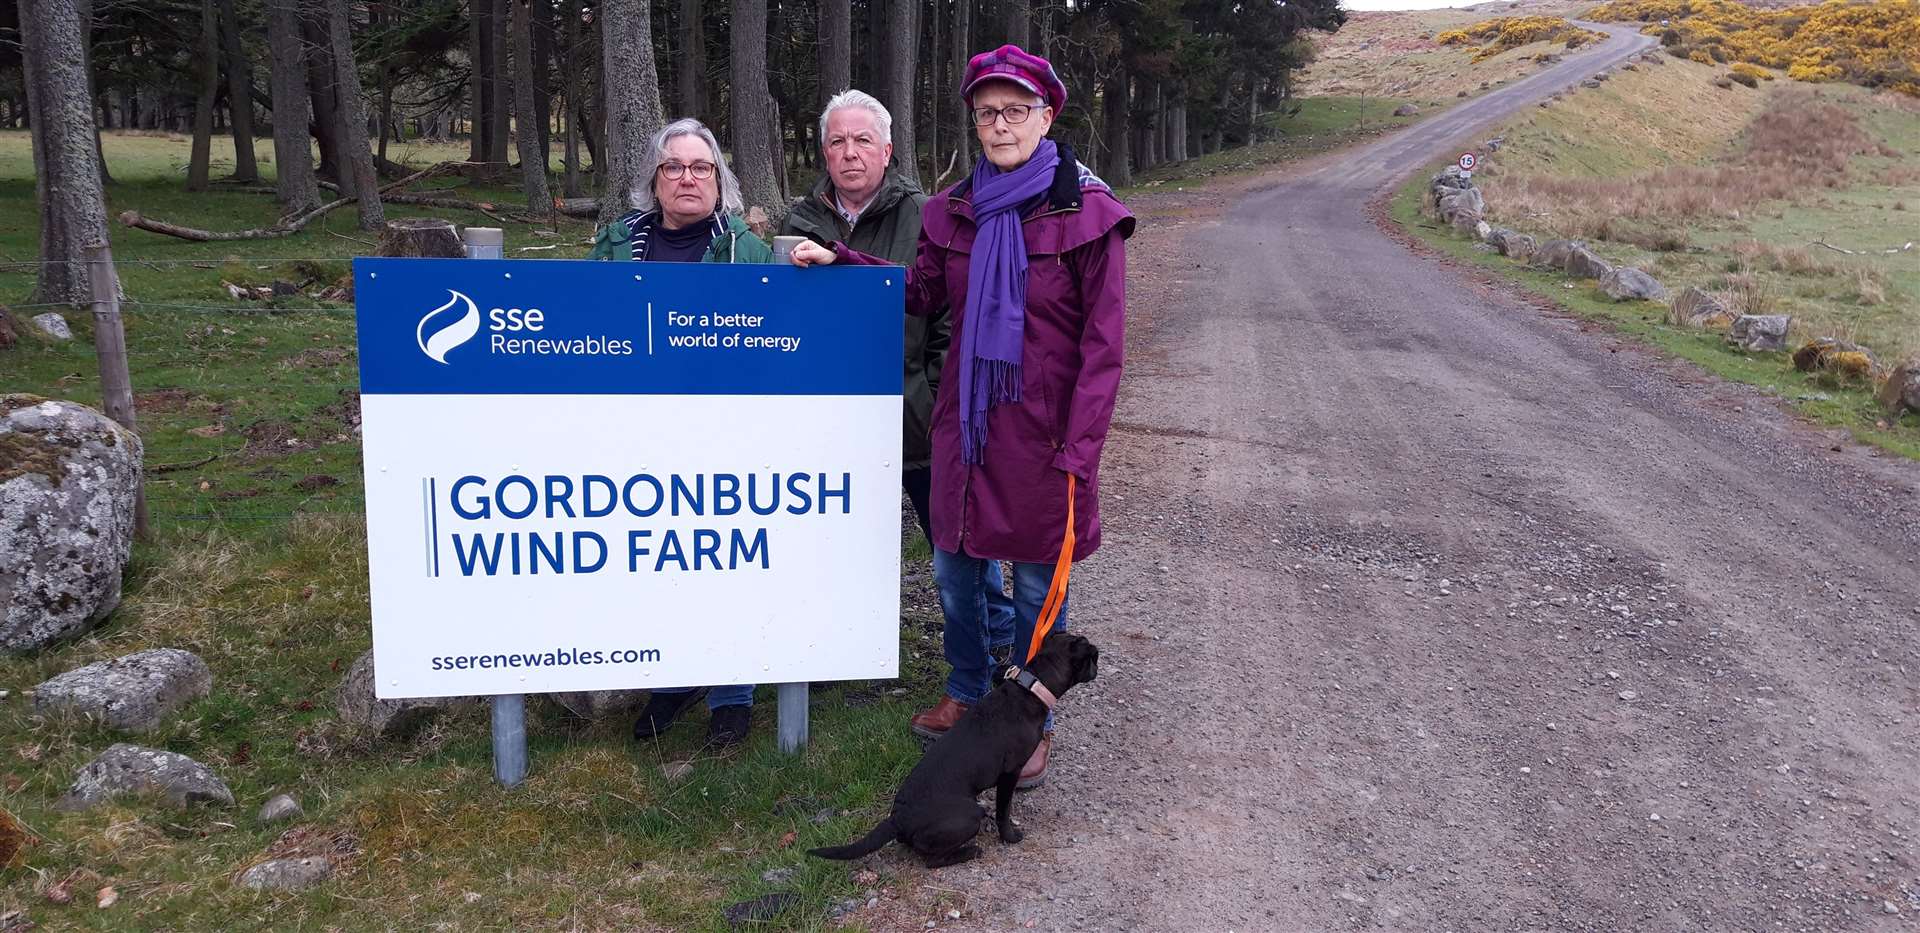 Christina Perera with her neighbours Richard and Muriel Mowat, who also objected to the hydrogen hub, at the entrance to the Gordonbush Wind Farm access road.